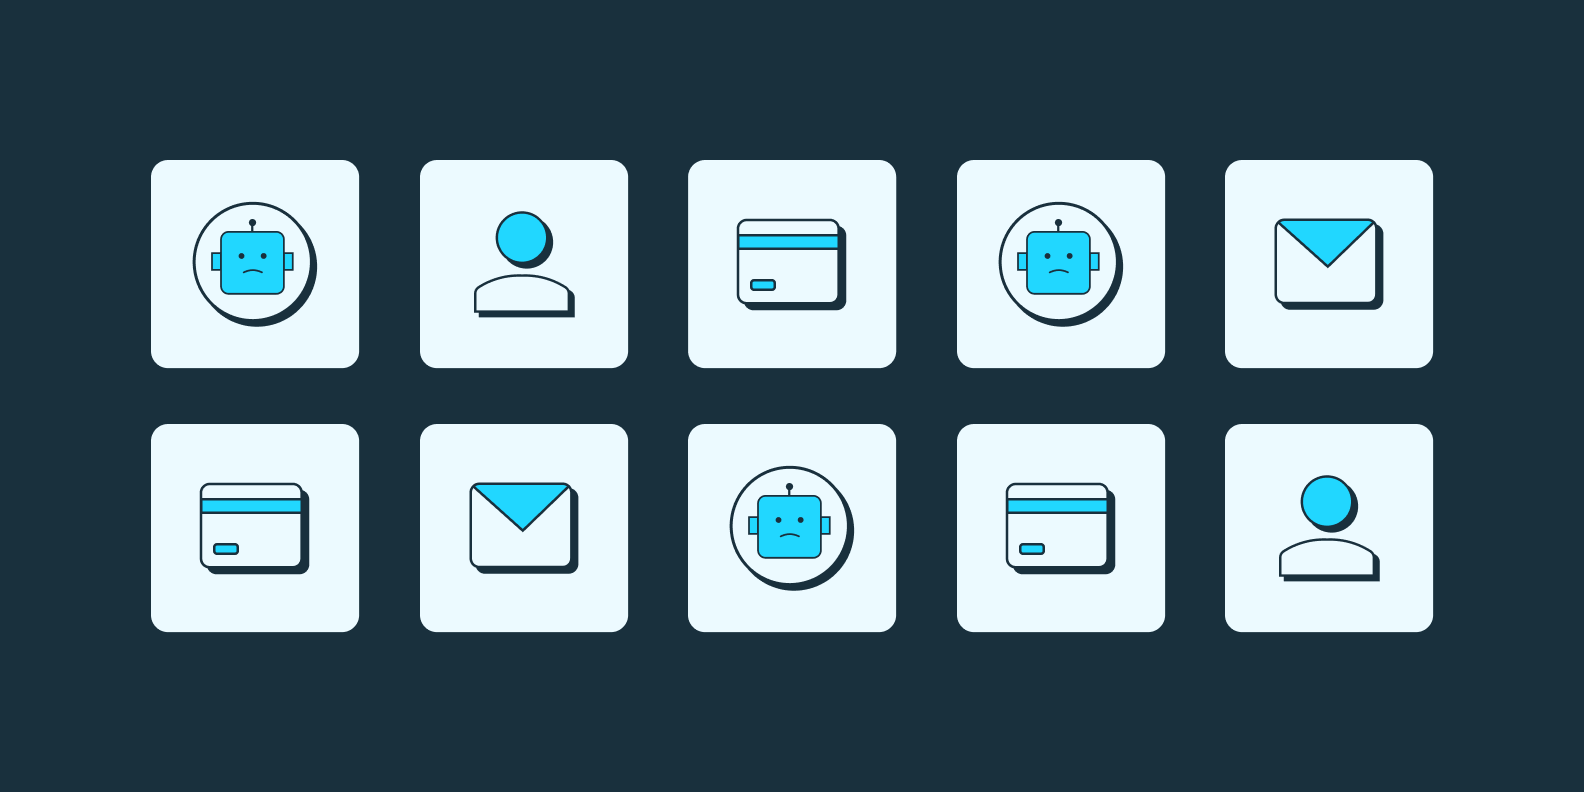 An array of icons representing different types of fraud – phishing, credit card fraud, identity theft, etc.